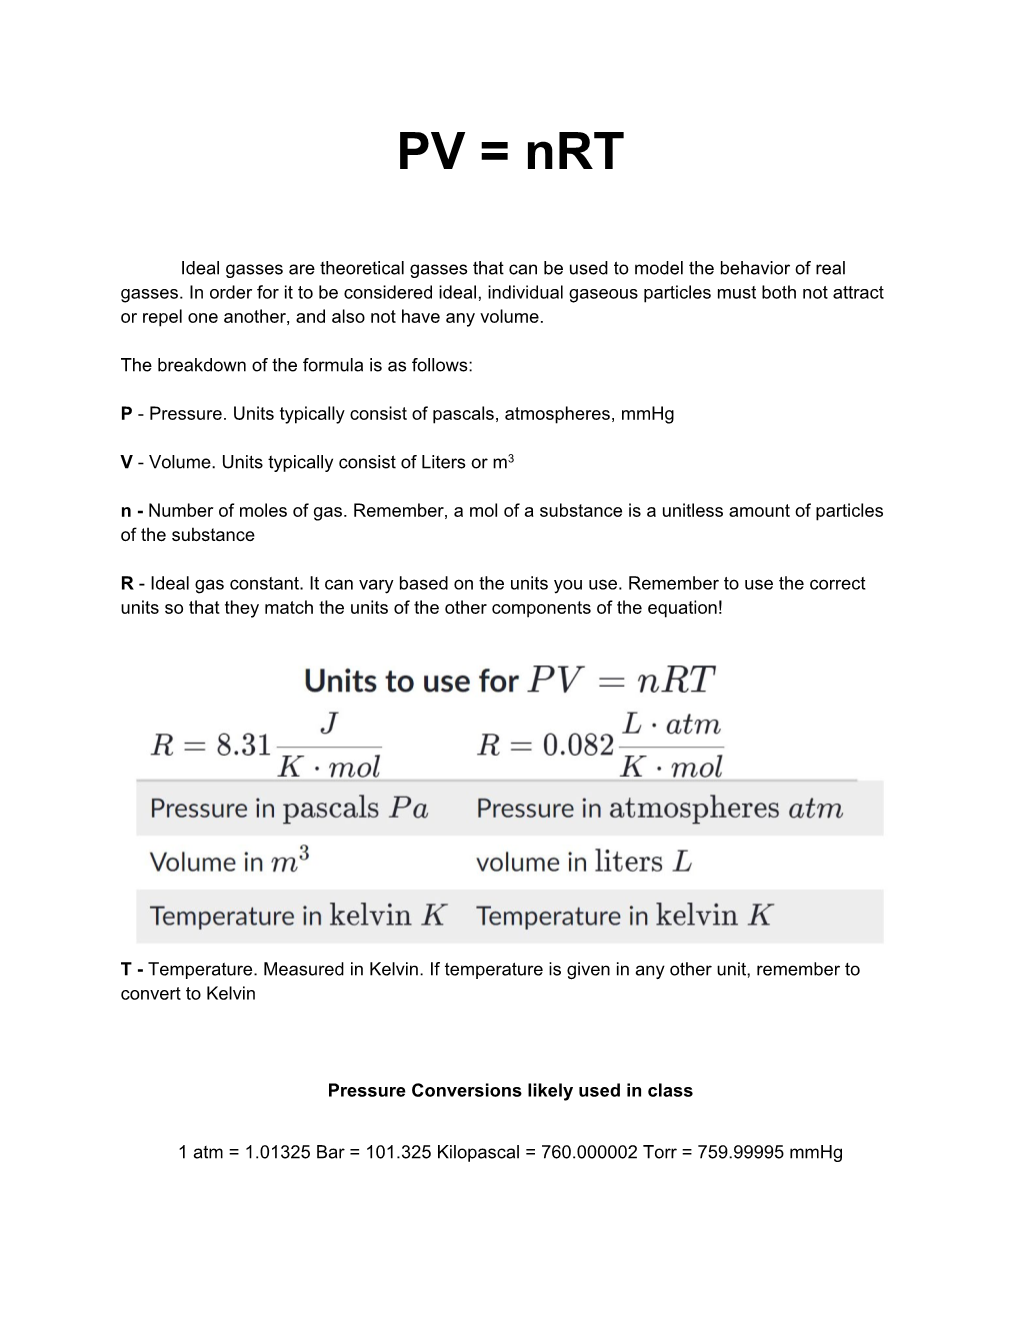 PV=Nrt and Combined Gas